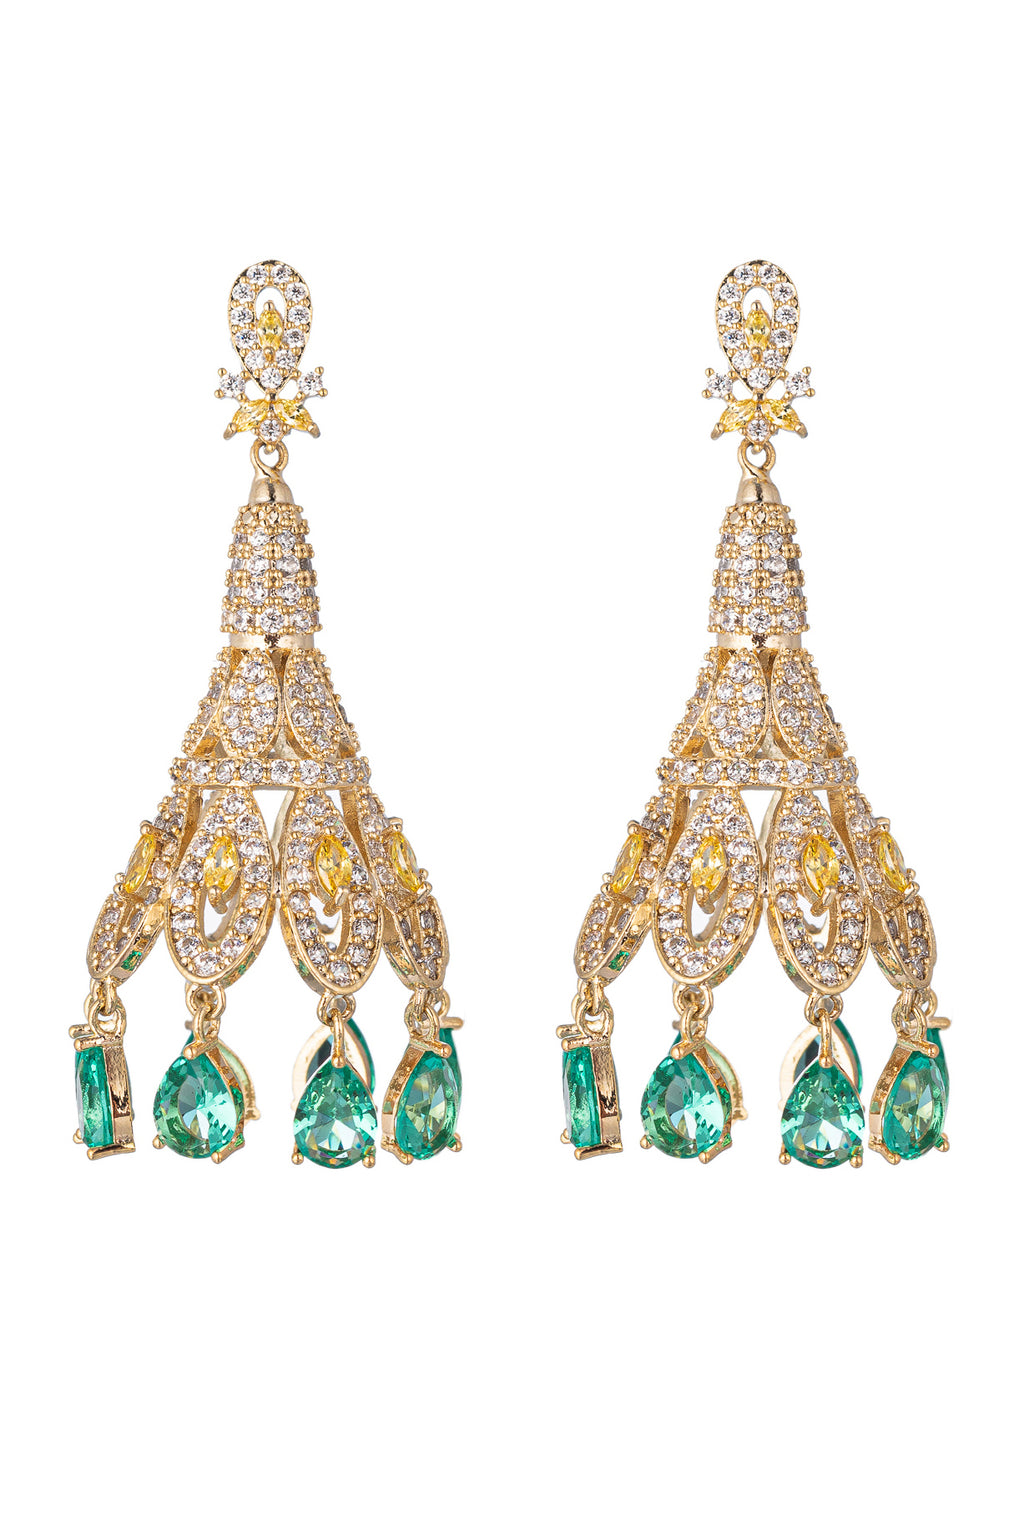 Gold tone brass bohemian dangle earrings studded with CZ crystals.